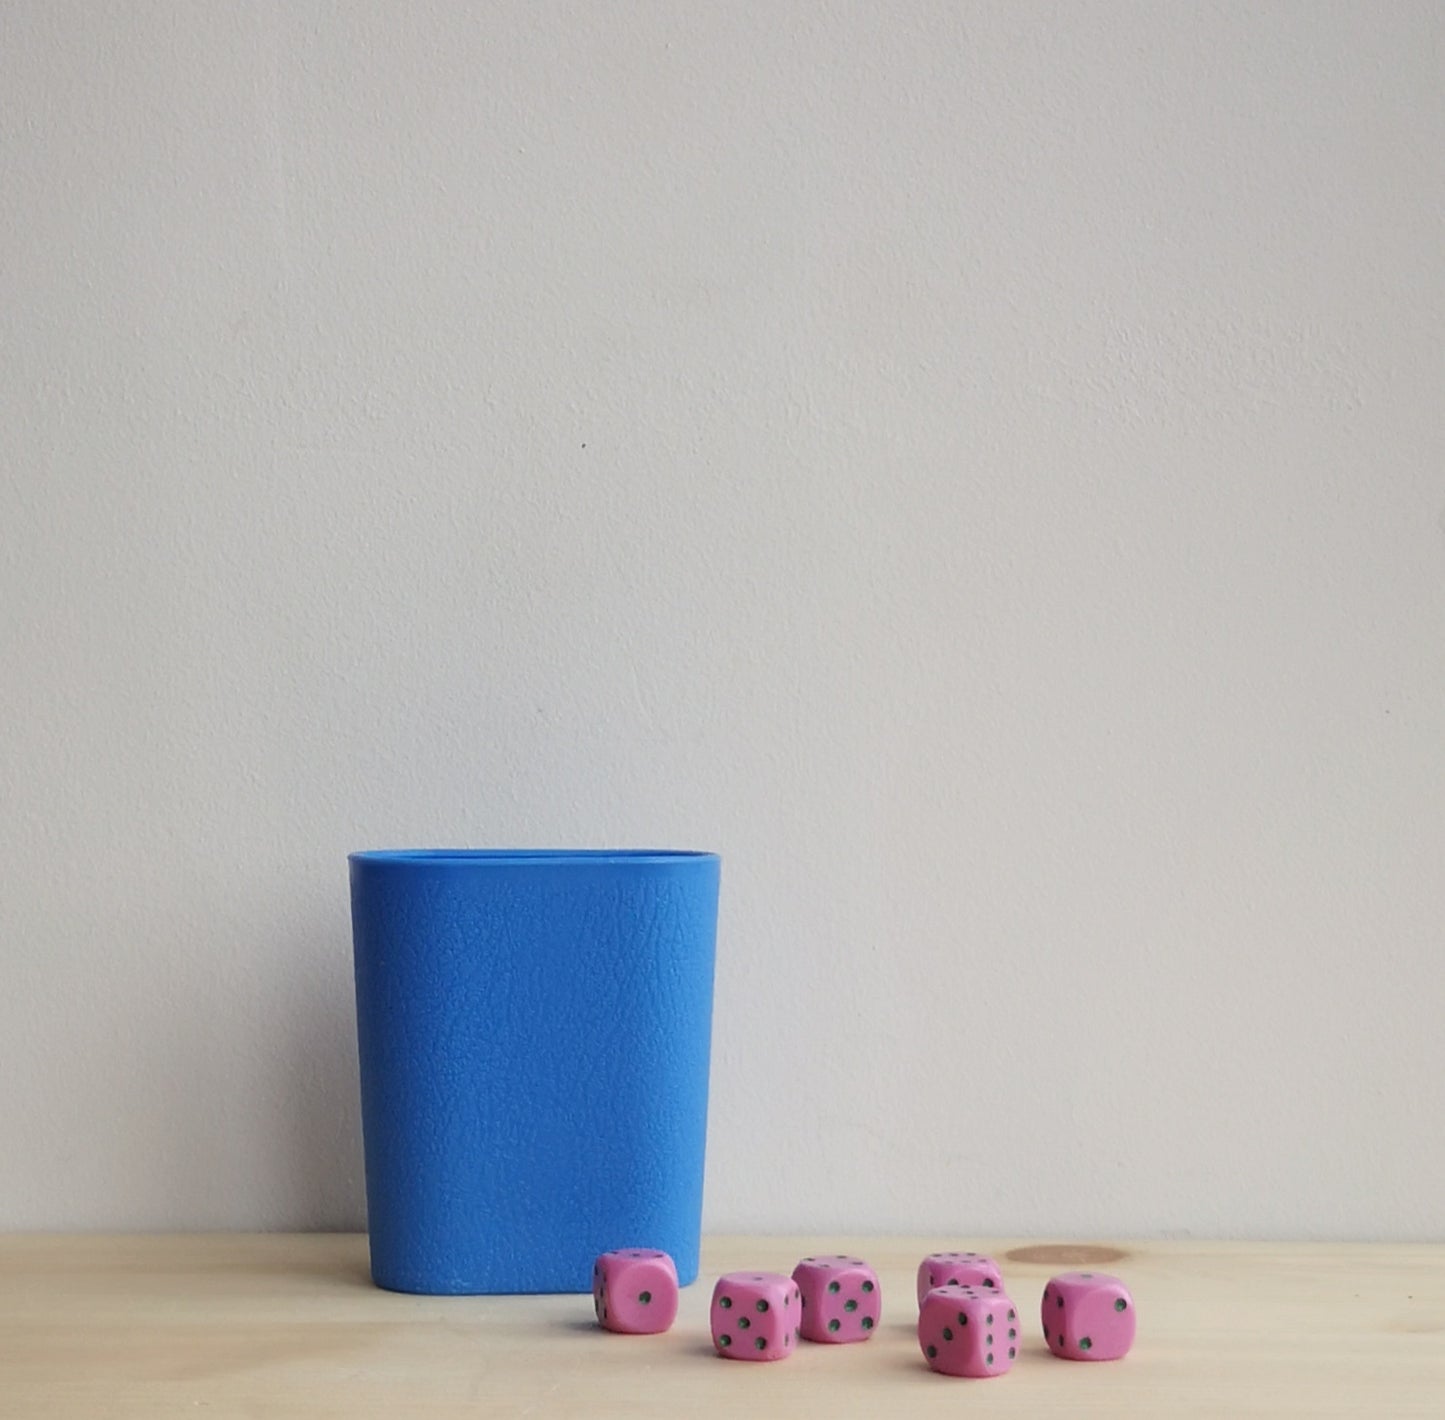 Cup and 6 dice